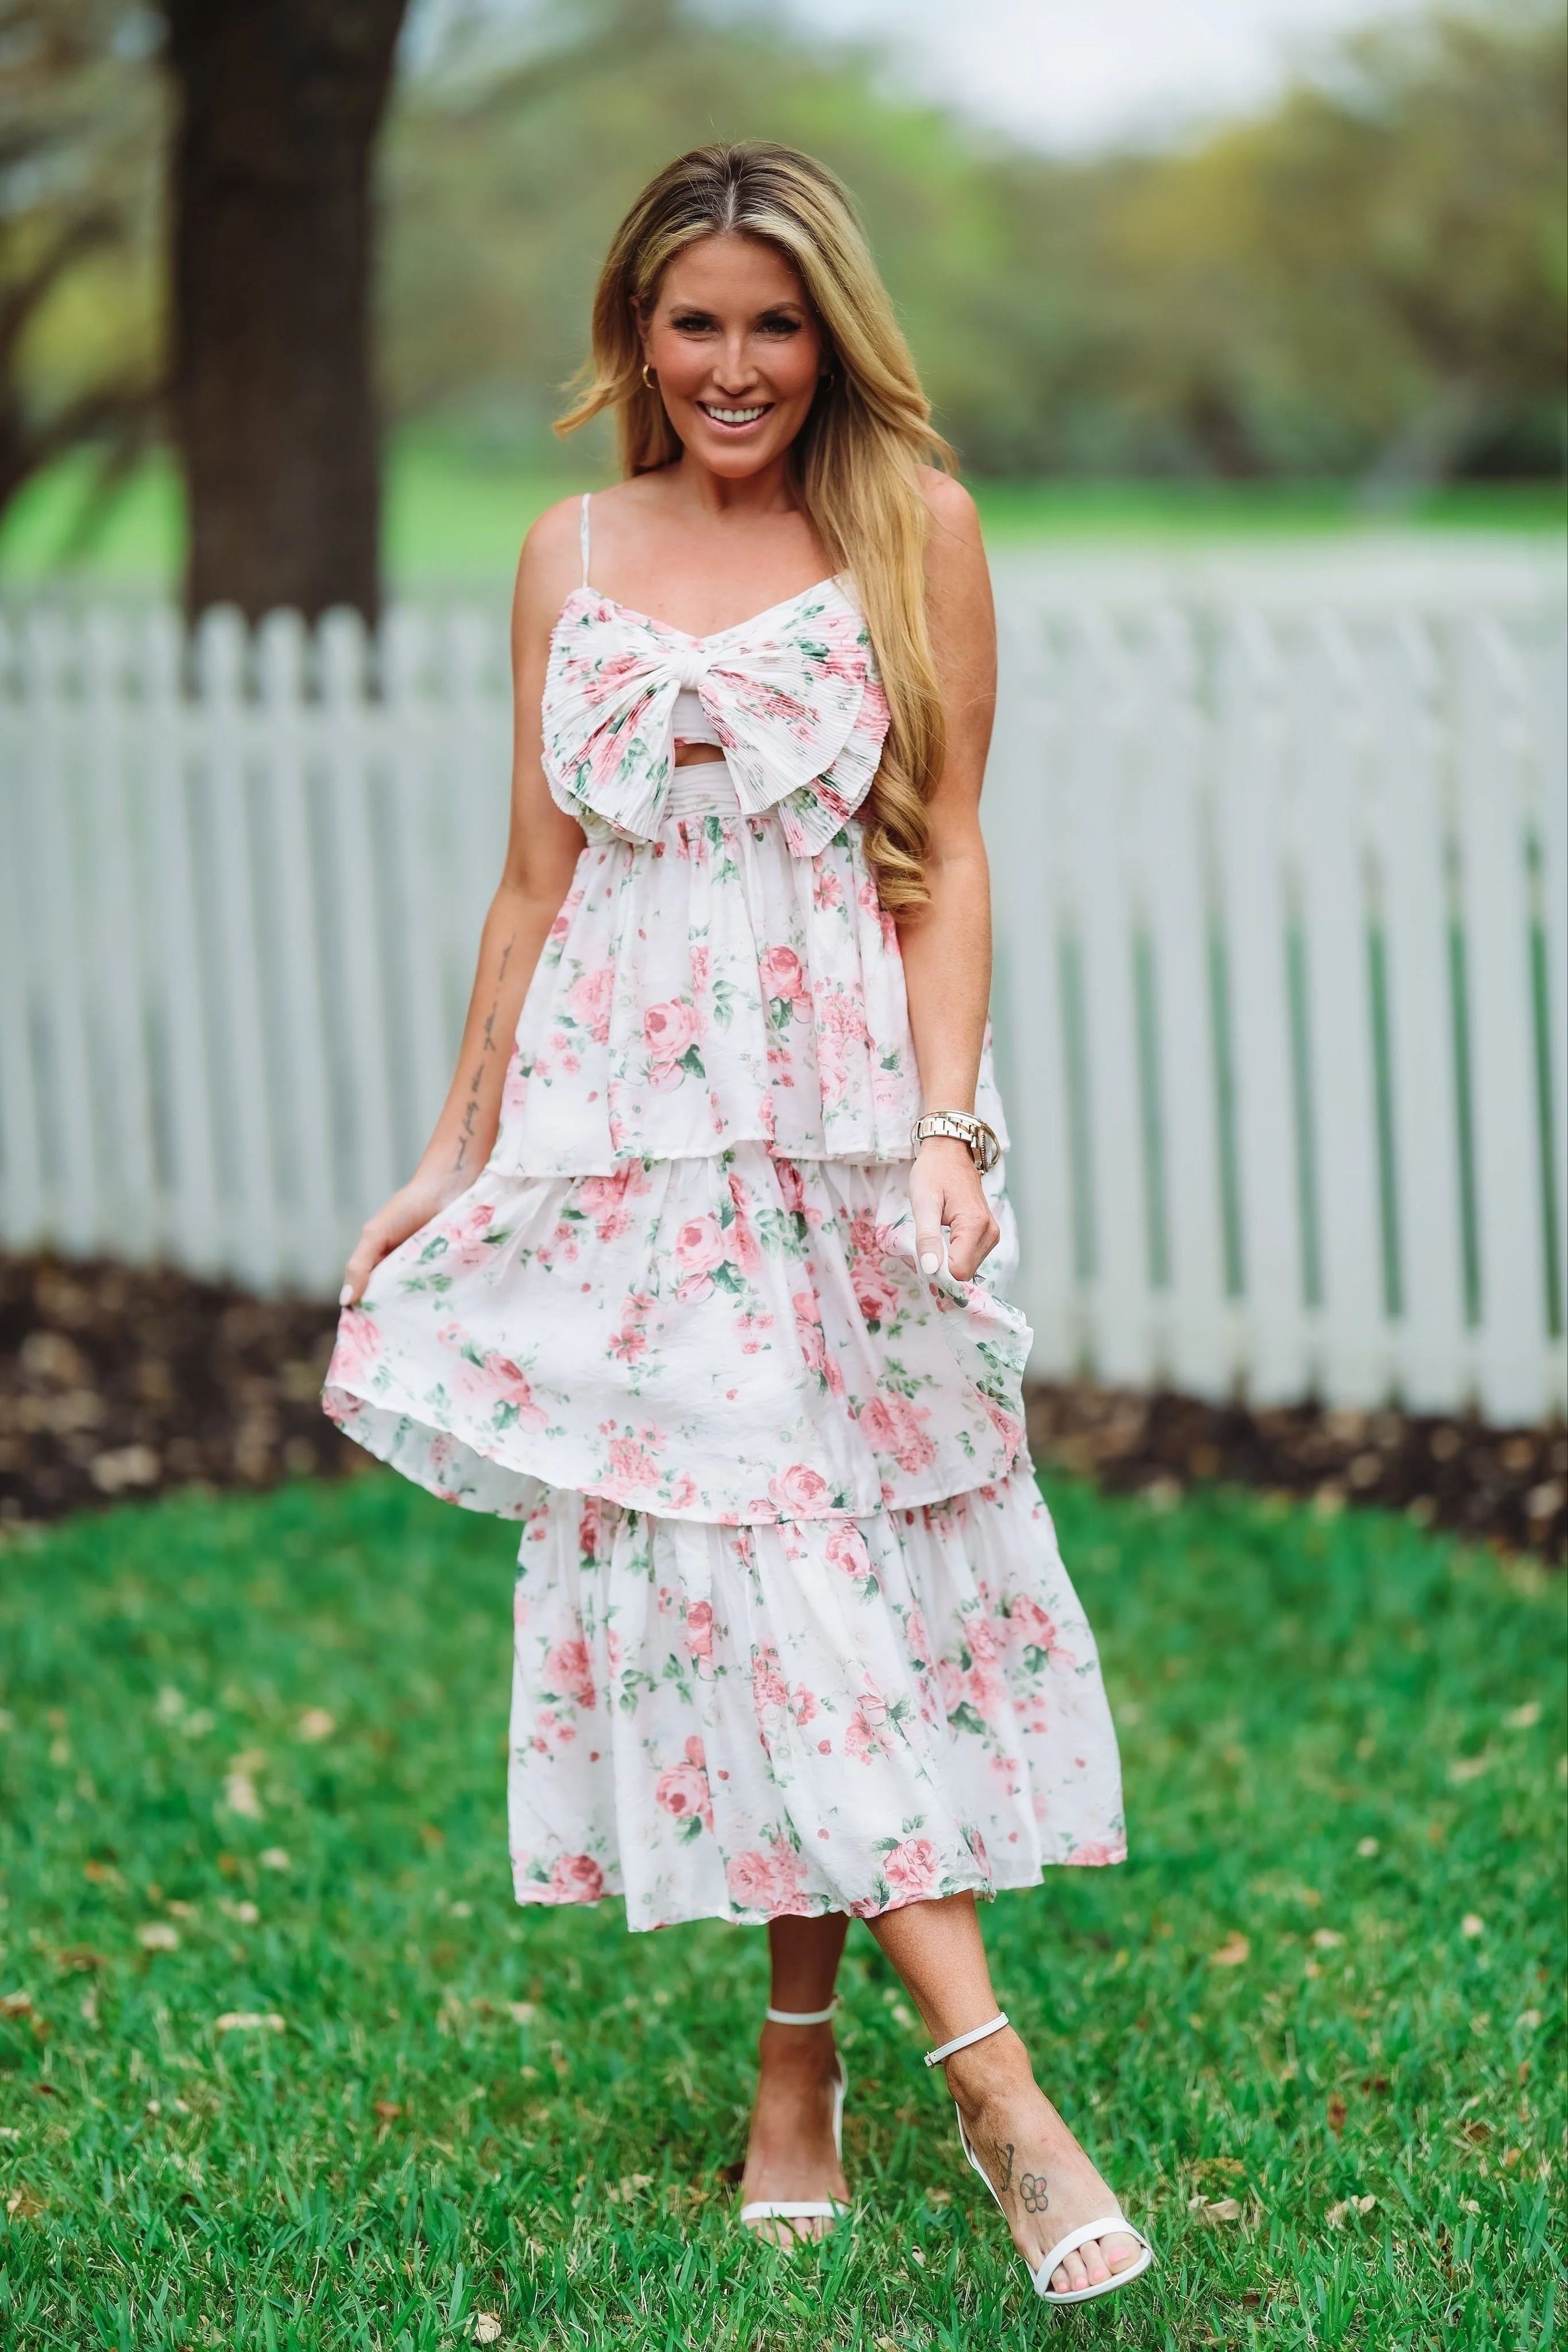 Feelings For You Midi Dress - Ivory and Pink | Hazel and Olive